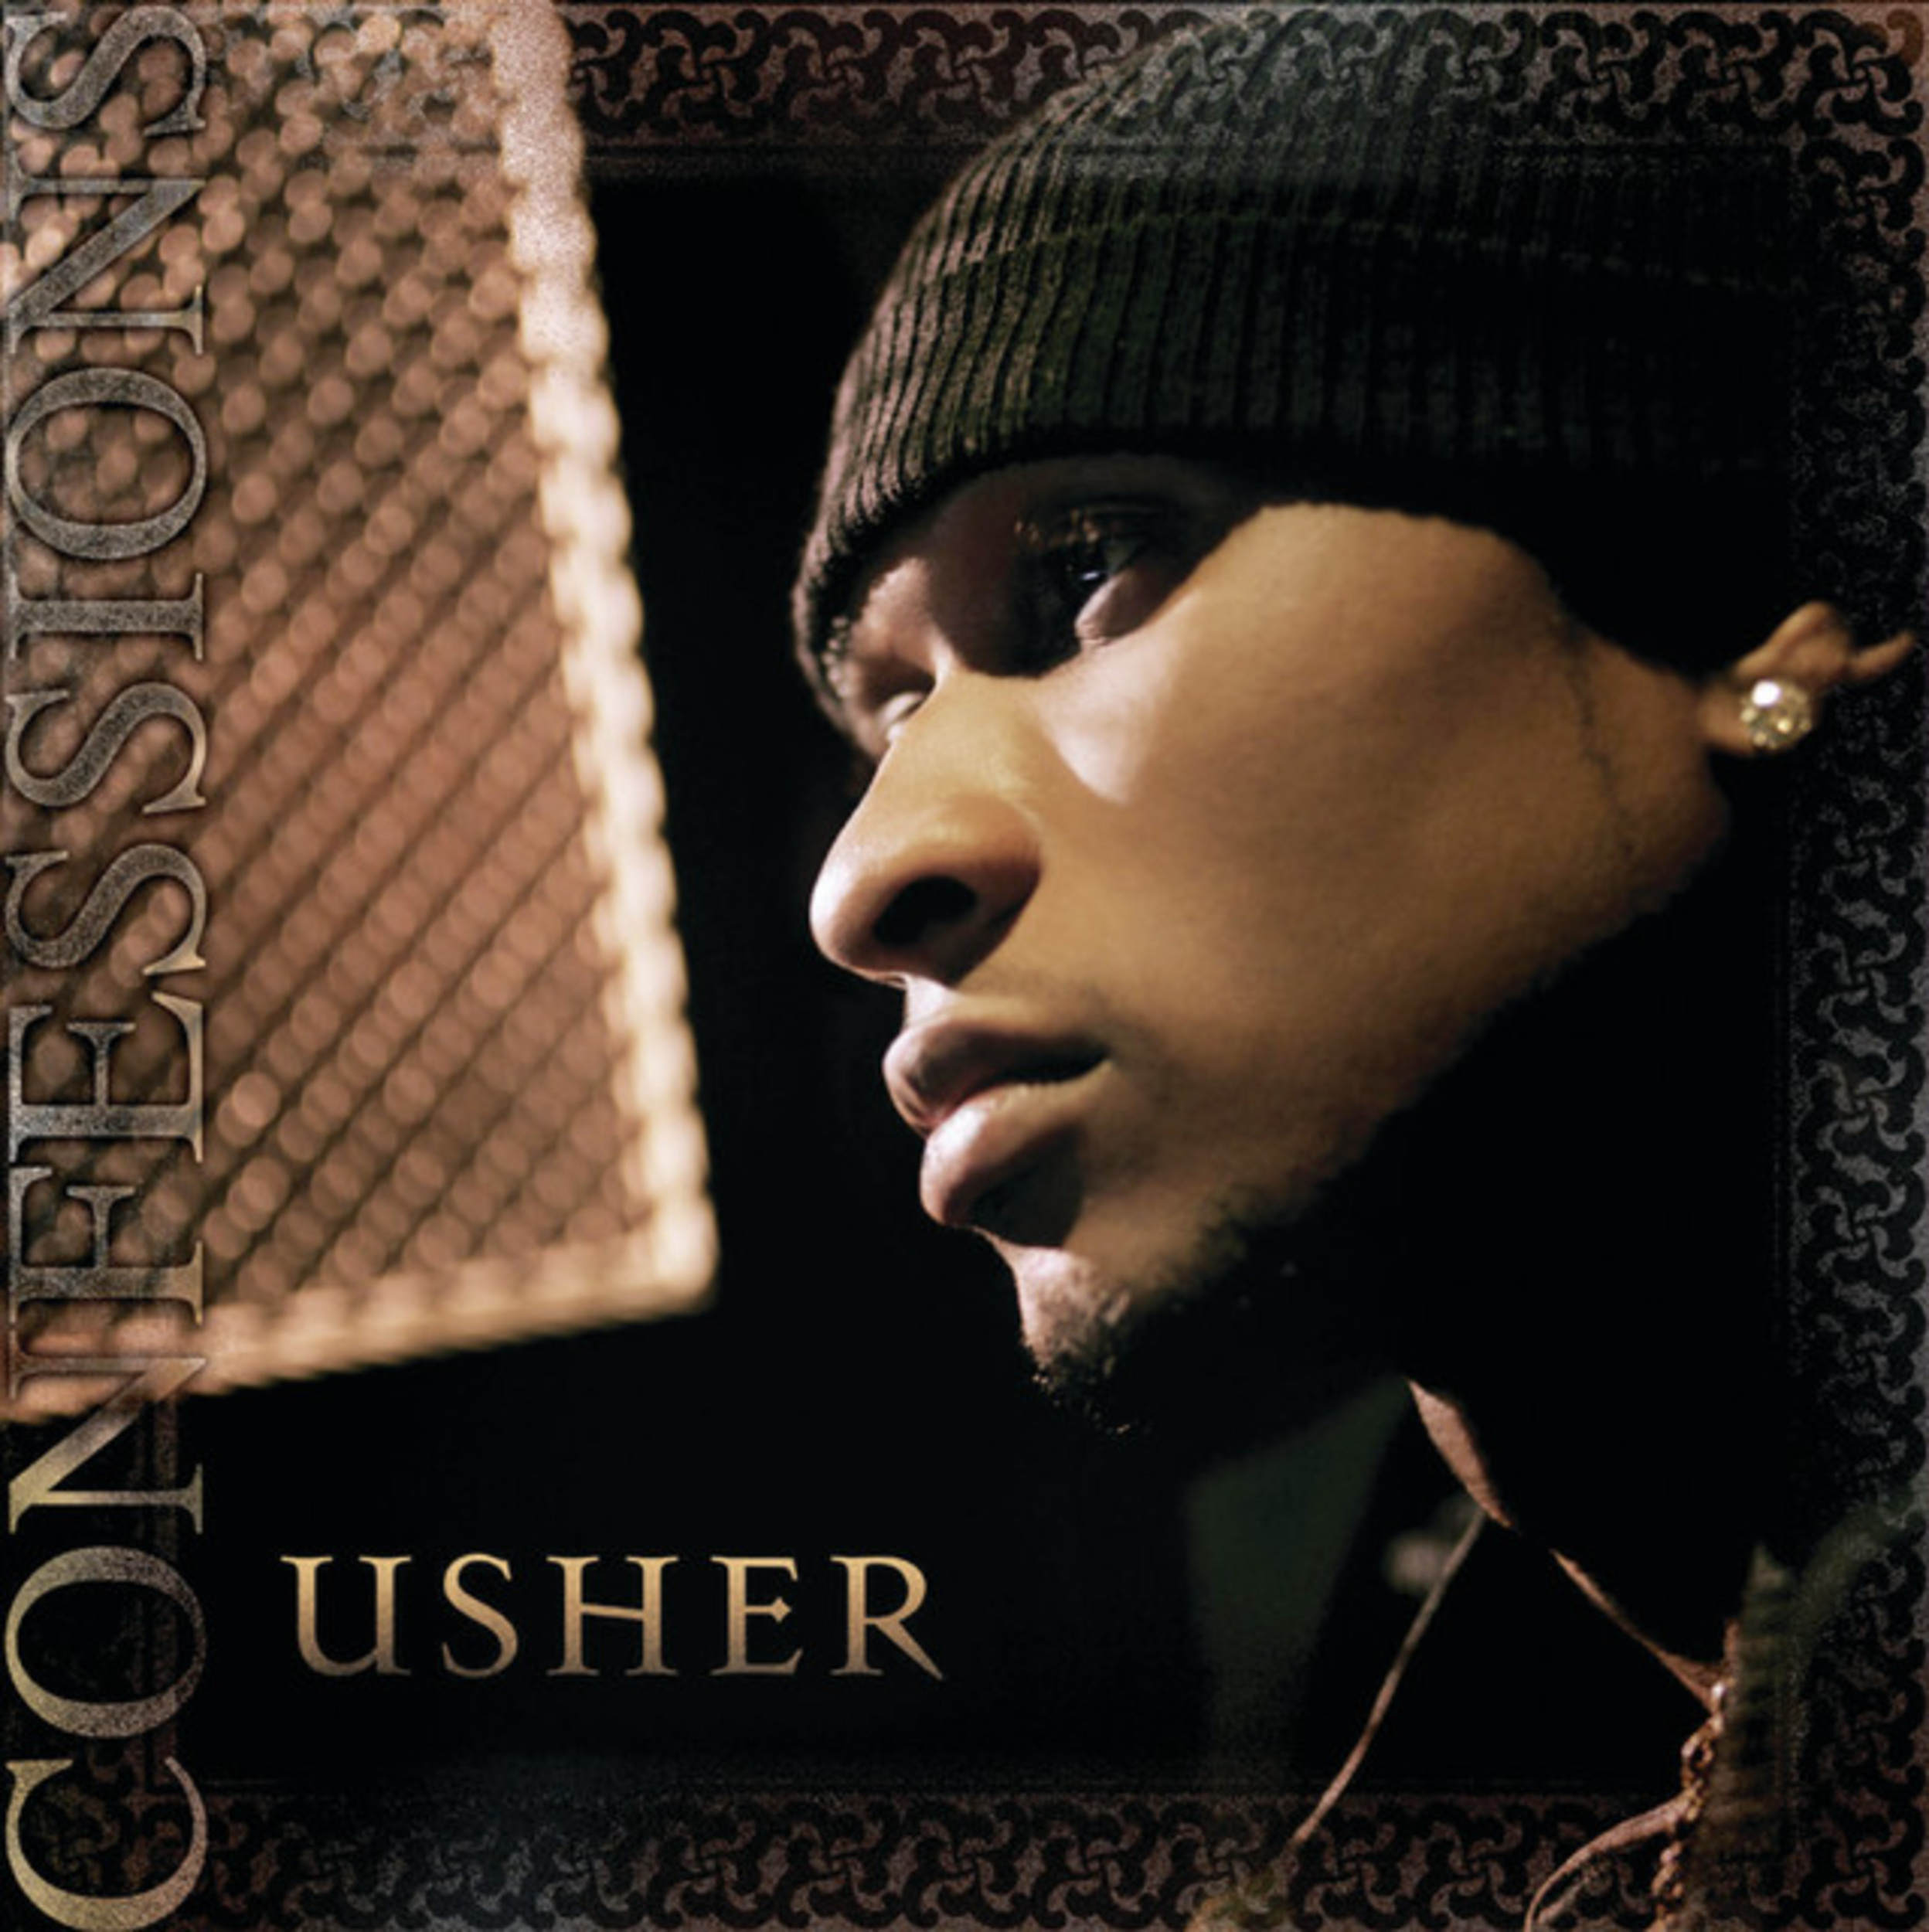 <p>After the success of his third album, <em>8701,</em> little did people know that Usher was about to drop his best-selling album to date with <em>Confessions.</em> While some of the album's themes focused on love and relationships, the themes weren't so much based on truths in Usher's personal life but rather in the lives of his collaborators Bryan-Michael Cox and Jermaine Dupri. In addition to Cox and Dupri, Usher worked with Lil Jon, Just Blaze, Dre & Vidal, and Jimmy Jam and Terry Lewis. Some of the album's hit singles included "Burn," "My Boo," <a href="https://www.youtube.com/watch?v=GxBSyx85Kp8">"Yeah!"</a> and the eponymous single, which helped push Confessions to become the 21st century's best-selling album by a Black artist. </p><p>You may also like: <a href='https://www.yardbarker.com/entertainment/articles/every_cameo_that_alfred_hitchcock_made_in_his_films_031624/s1__34868963'>Every cameo that Alfred Hitchcock made in his films</a></p>